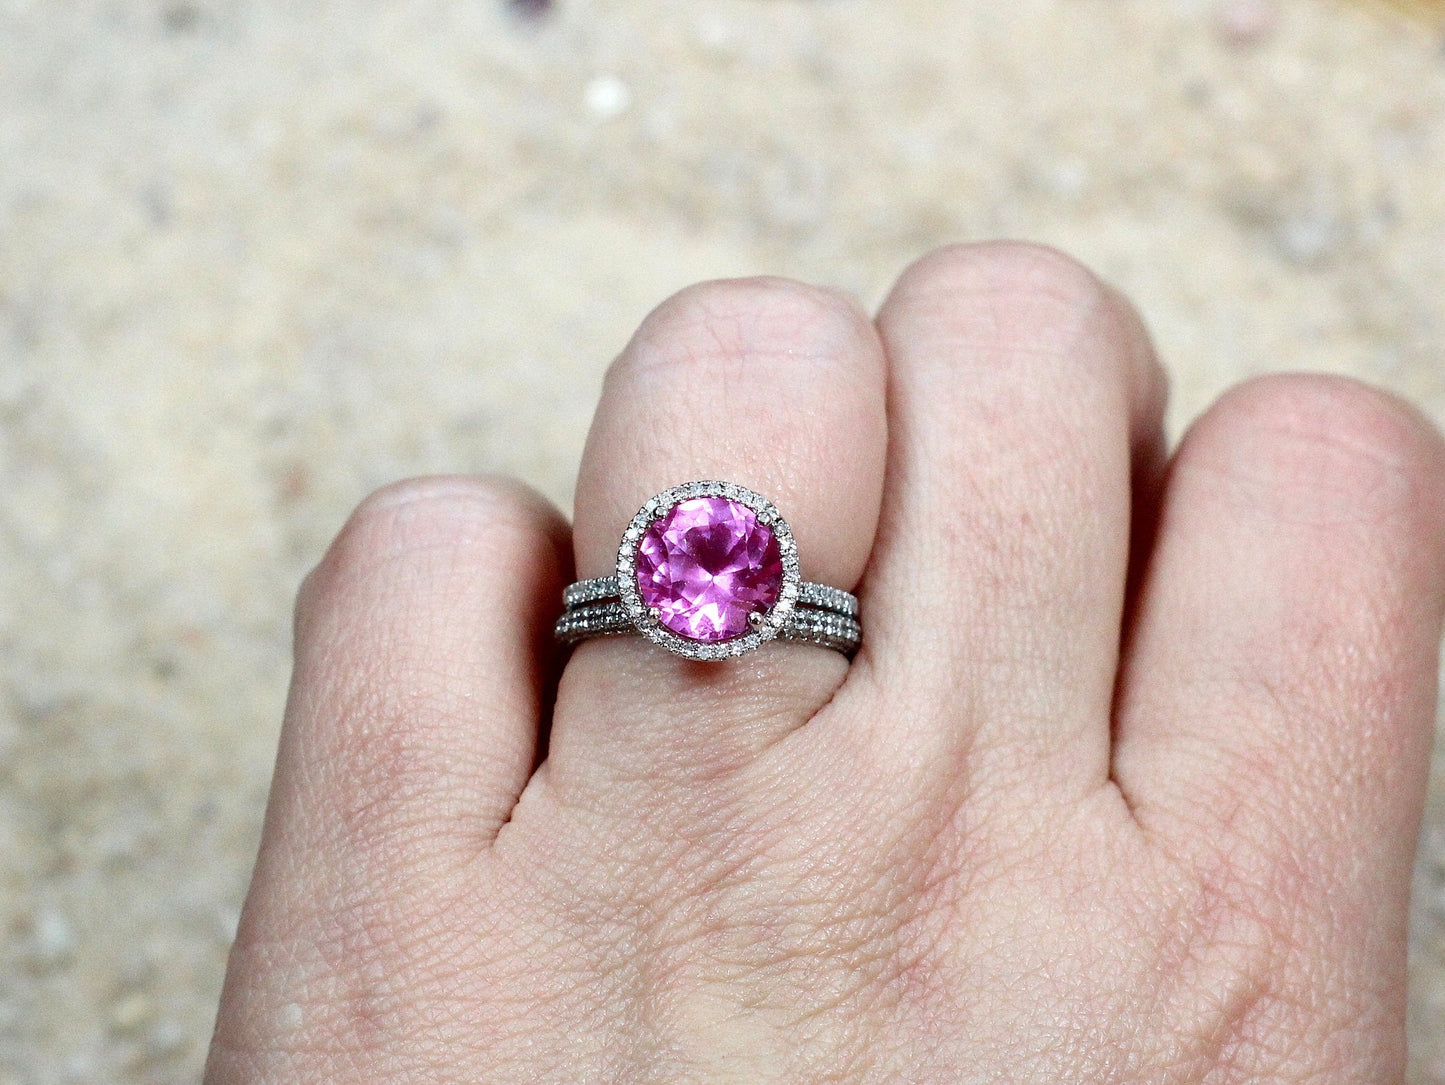 Ready to Ship Pink Sapphire Enagagement Ring Set, Round Diamond Halo, White Sapphire Pave Band, Pricus, Elpis, 3ct, 9mm BellaMoreDesign.com